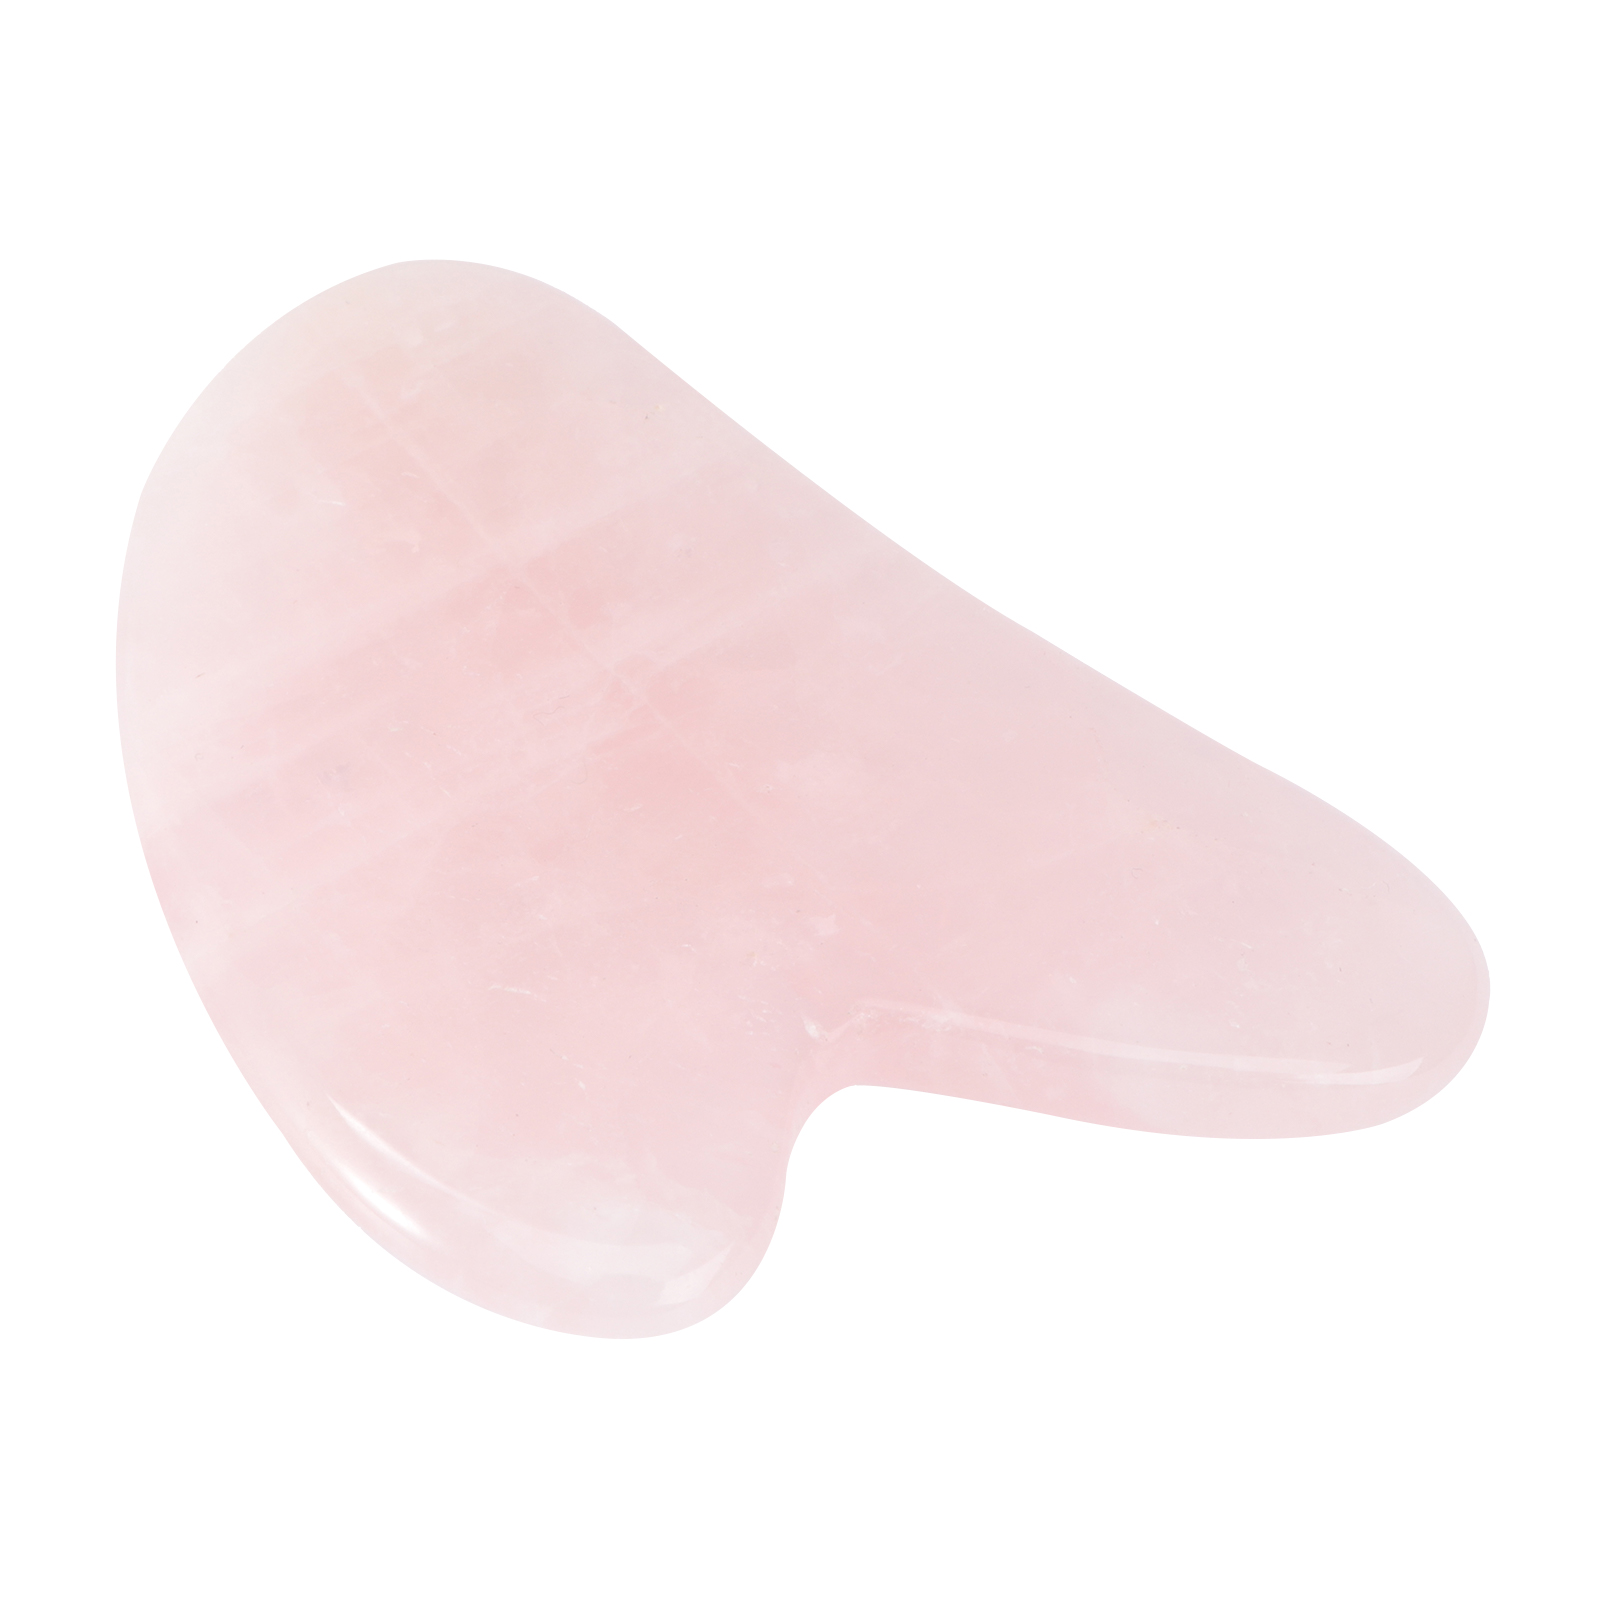 Pink Gua Sha Tools Guasha Tool for Face Skincare Facial Body Acupuncture Relieve Muscle Tensions Reduce Puffiness Festive Gifts